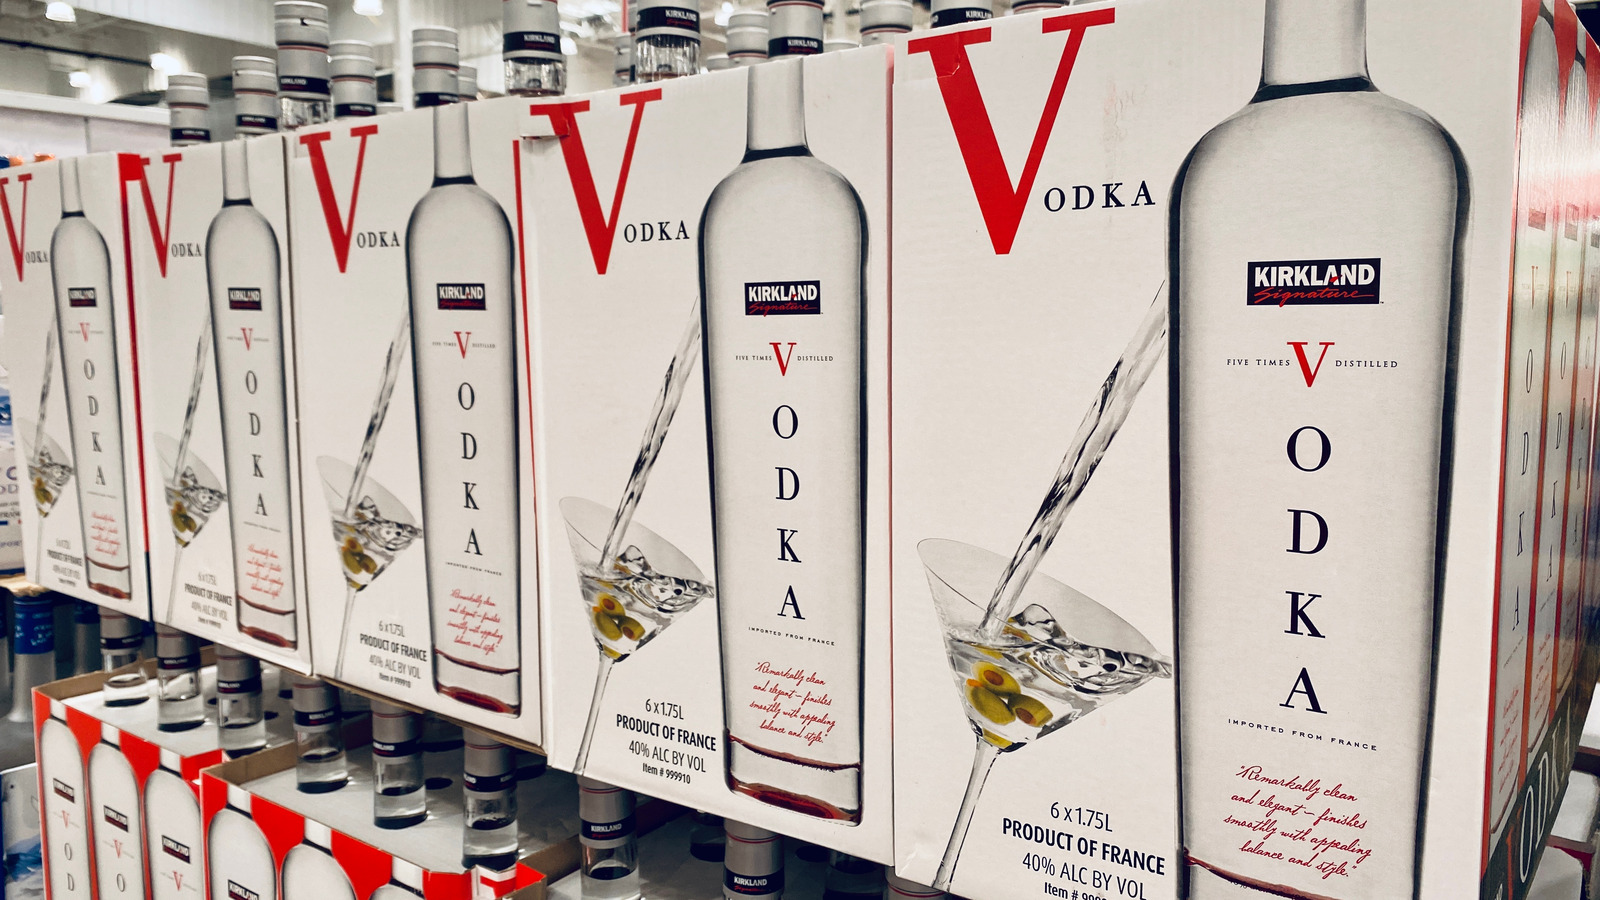 Costco Is Offering A Refund On Kirkland Vodka After Numerous